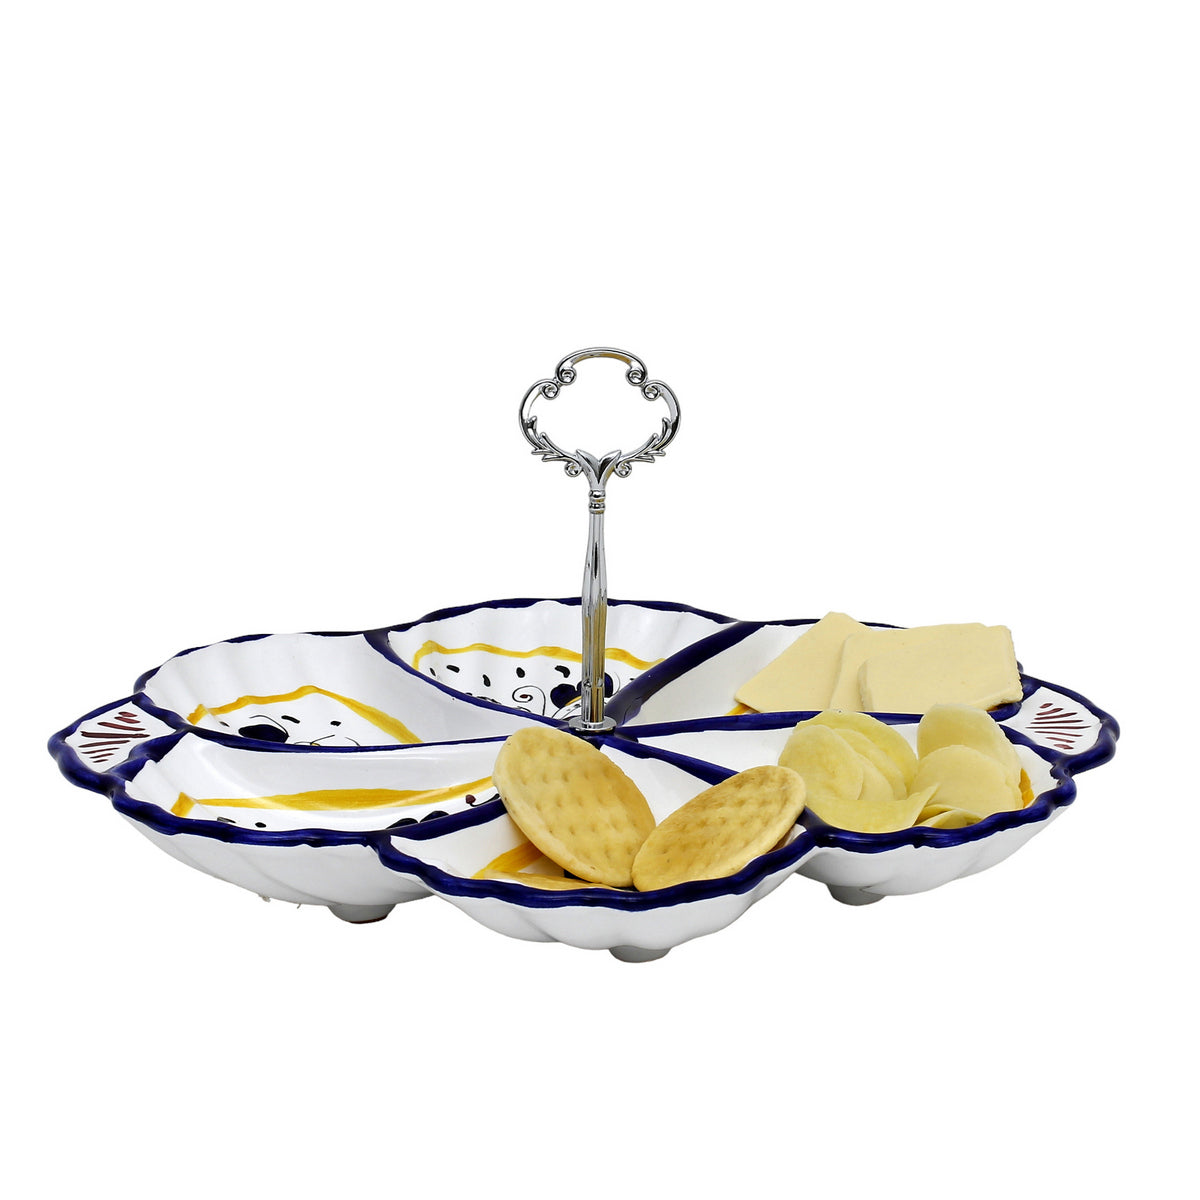 ORVIETO BLUE ROOSTER: Handled Tidbit Snack Tray Fiore/Shell server - Six Compartments - Artistica.com